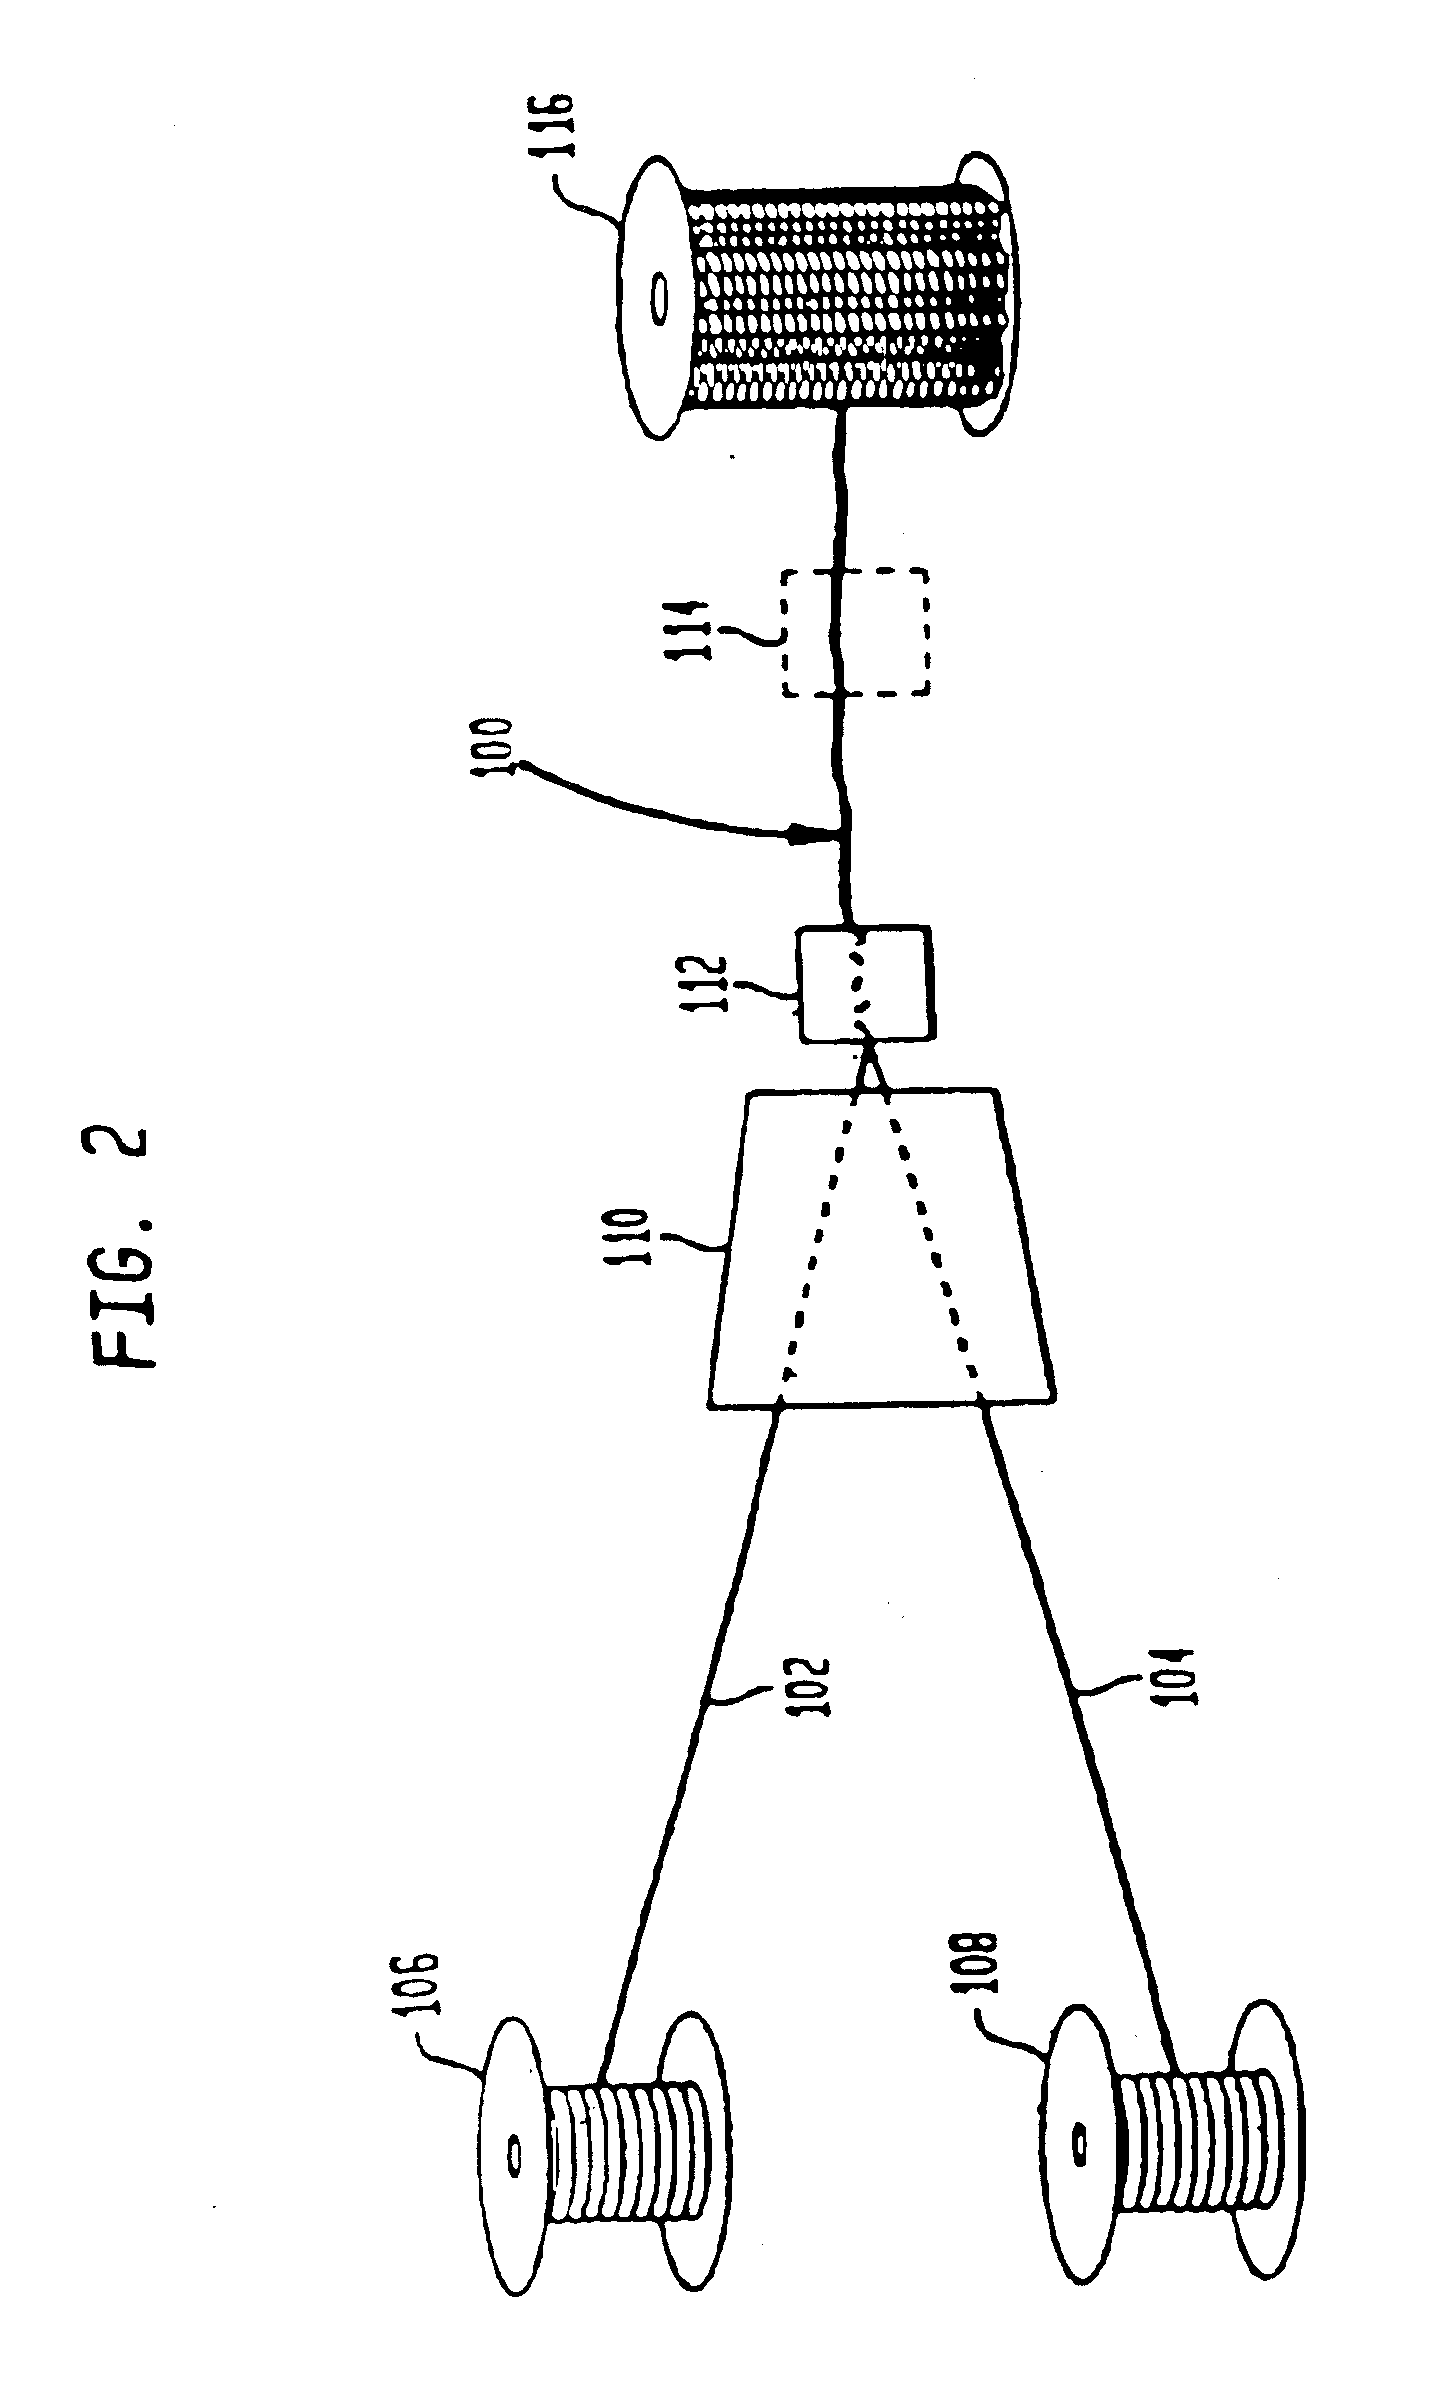 Method of making furniture with synthetic woven material